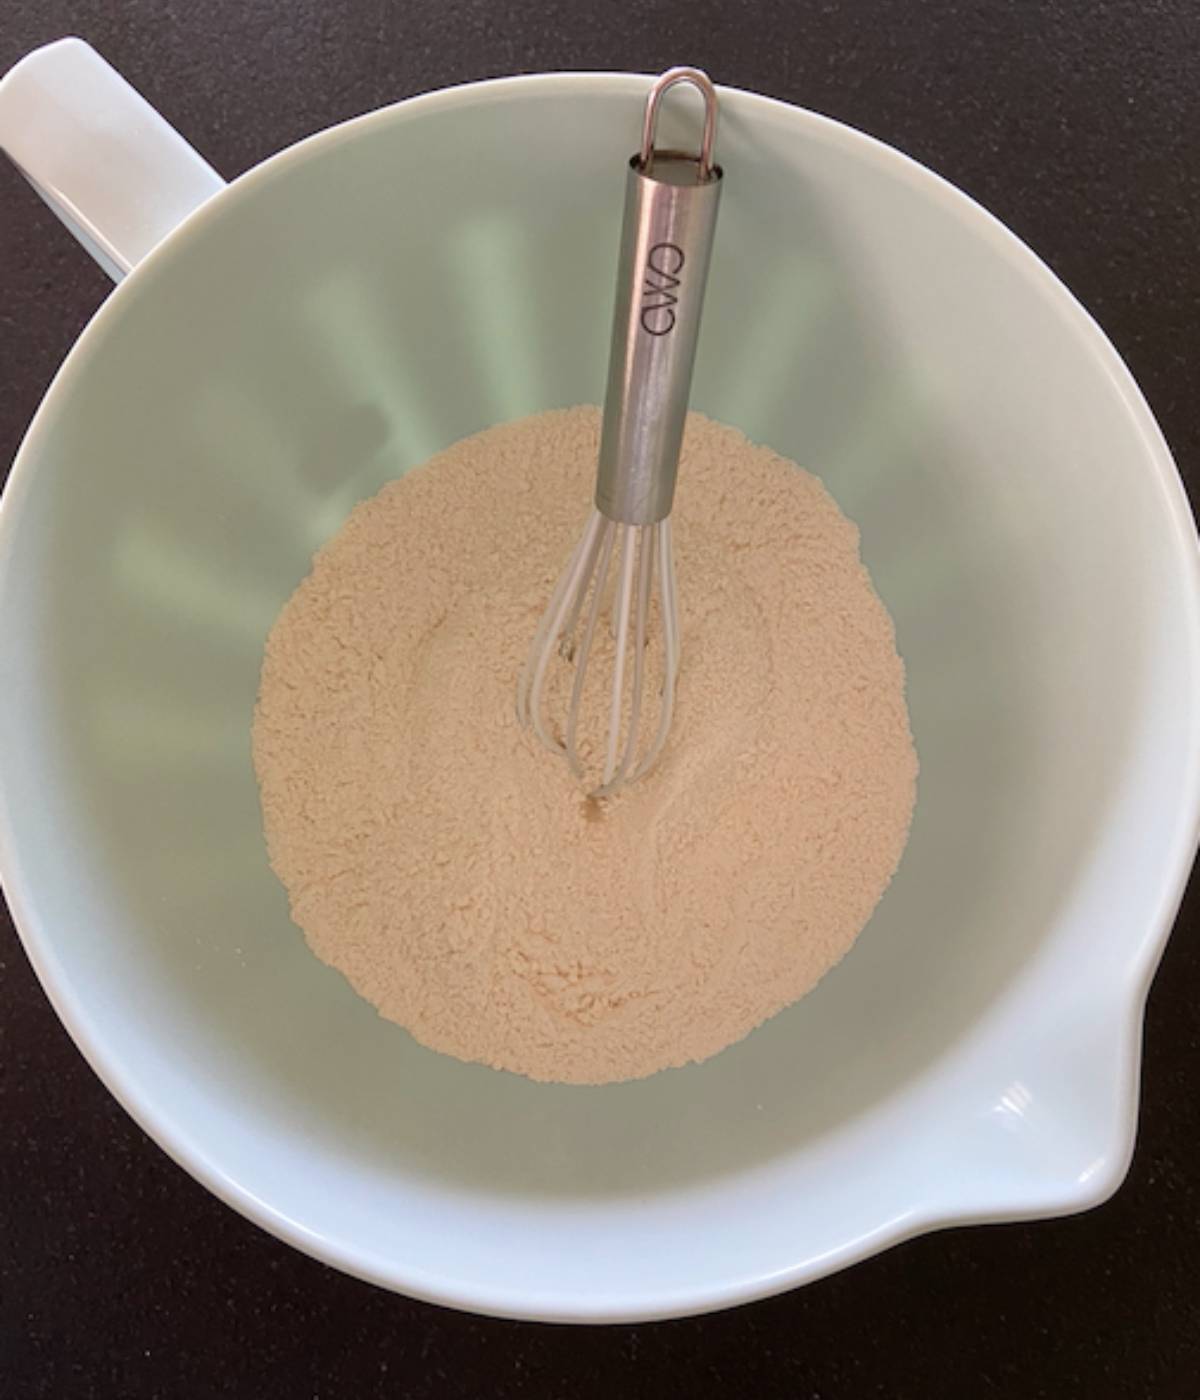 Dry ingredients in blue bowl with whisk.